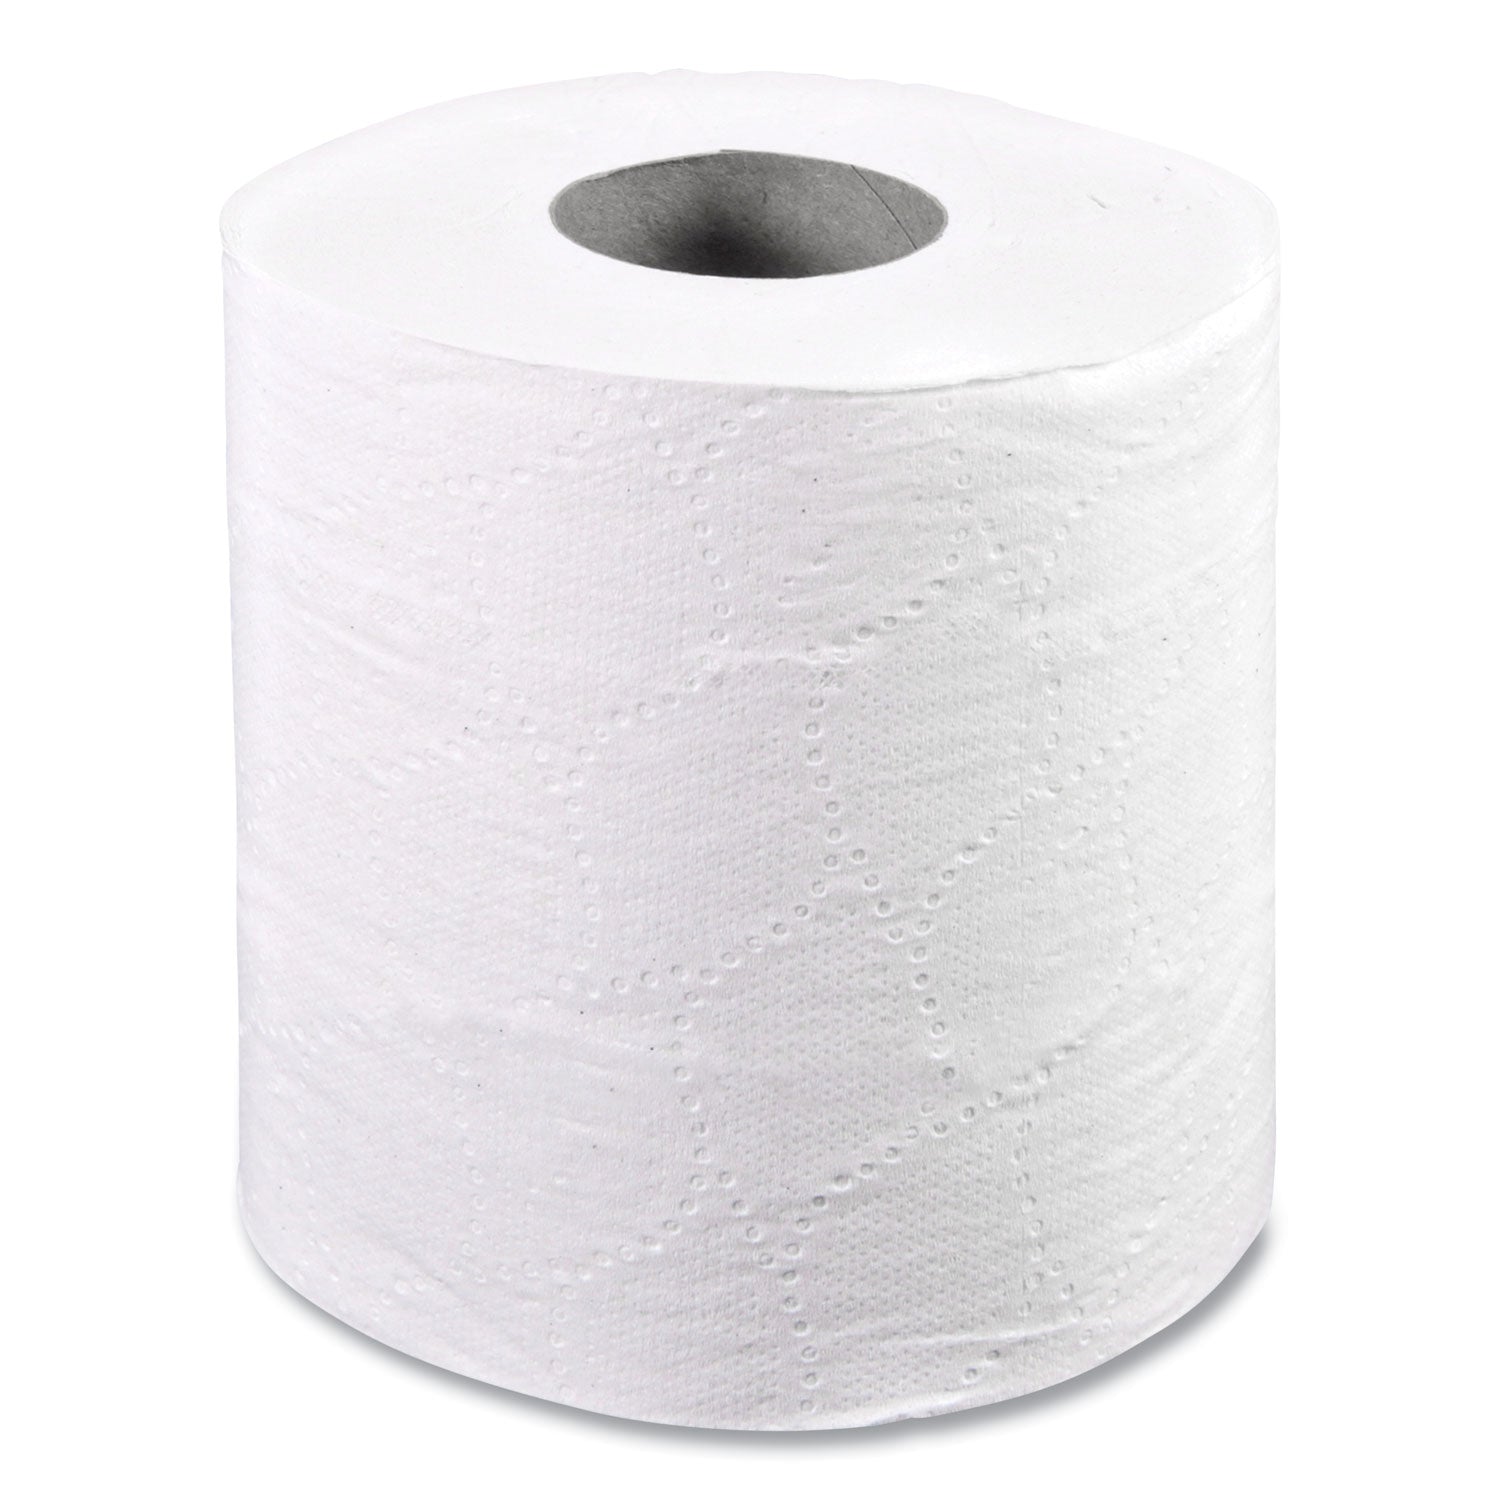 2-ply-toilet-tissue-septic-safe-white-45-x-45-500-sheets-roll-96-rolls-carton_bwk6155b - 2